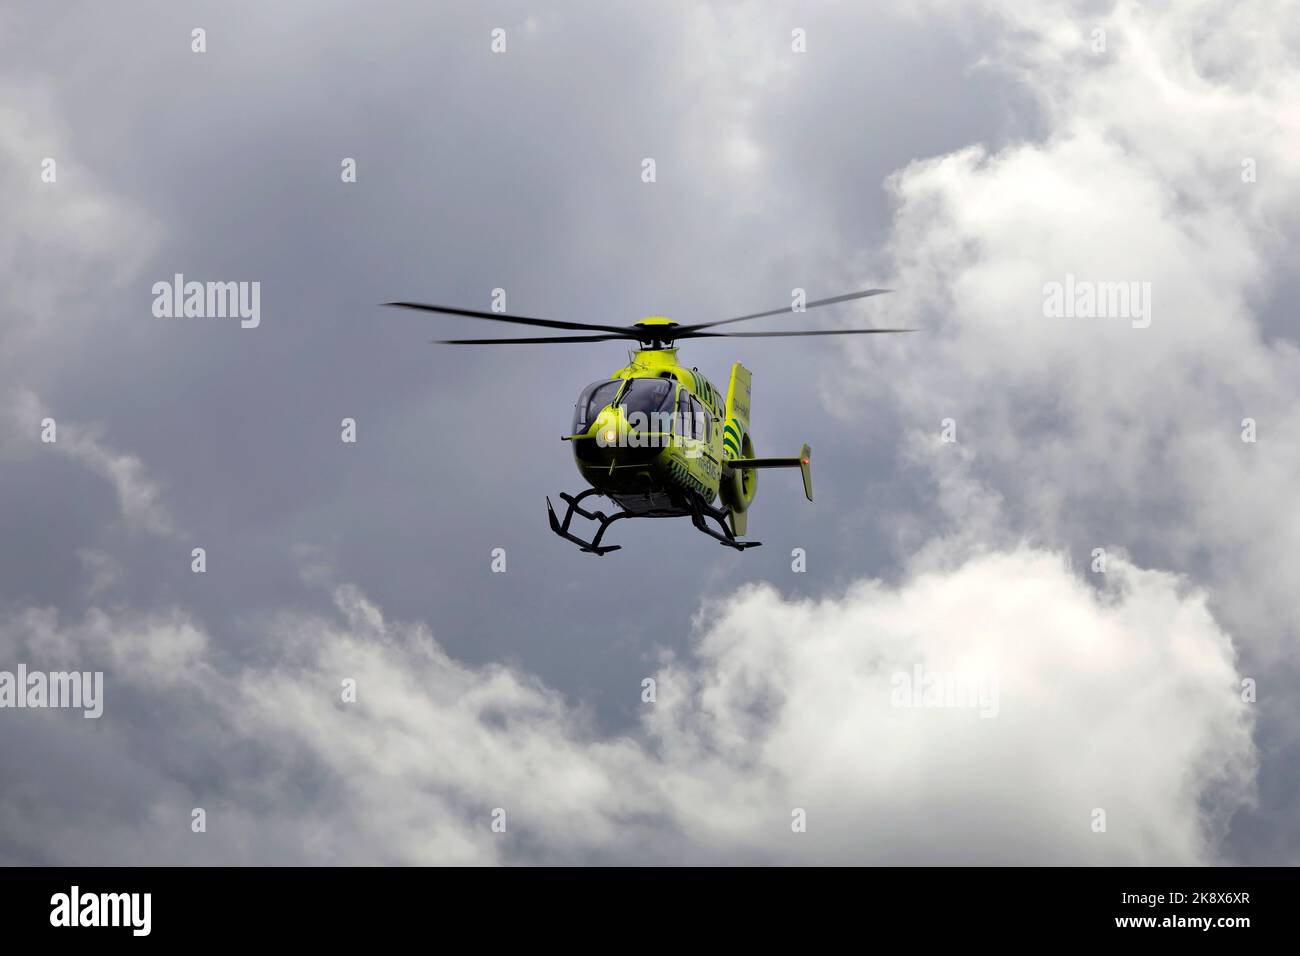 FinnHEMS medical helicopter in flight against dramatic cloudy sky. FinnHEMS is an abbreviation for Finnish Helicopter Emergency Medical Services. Stock Photo